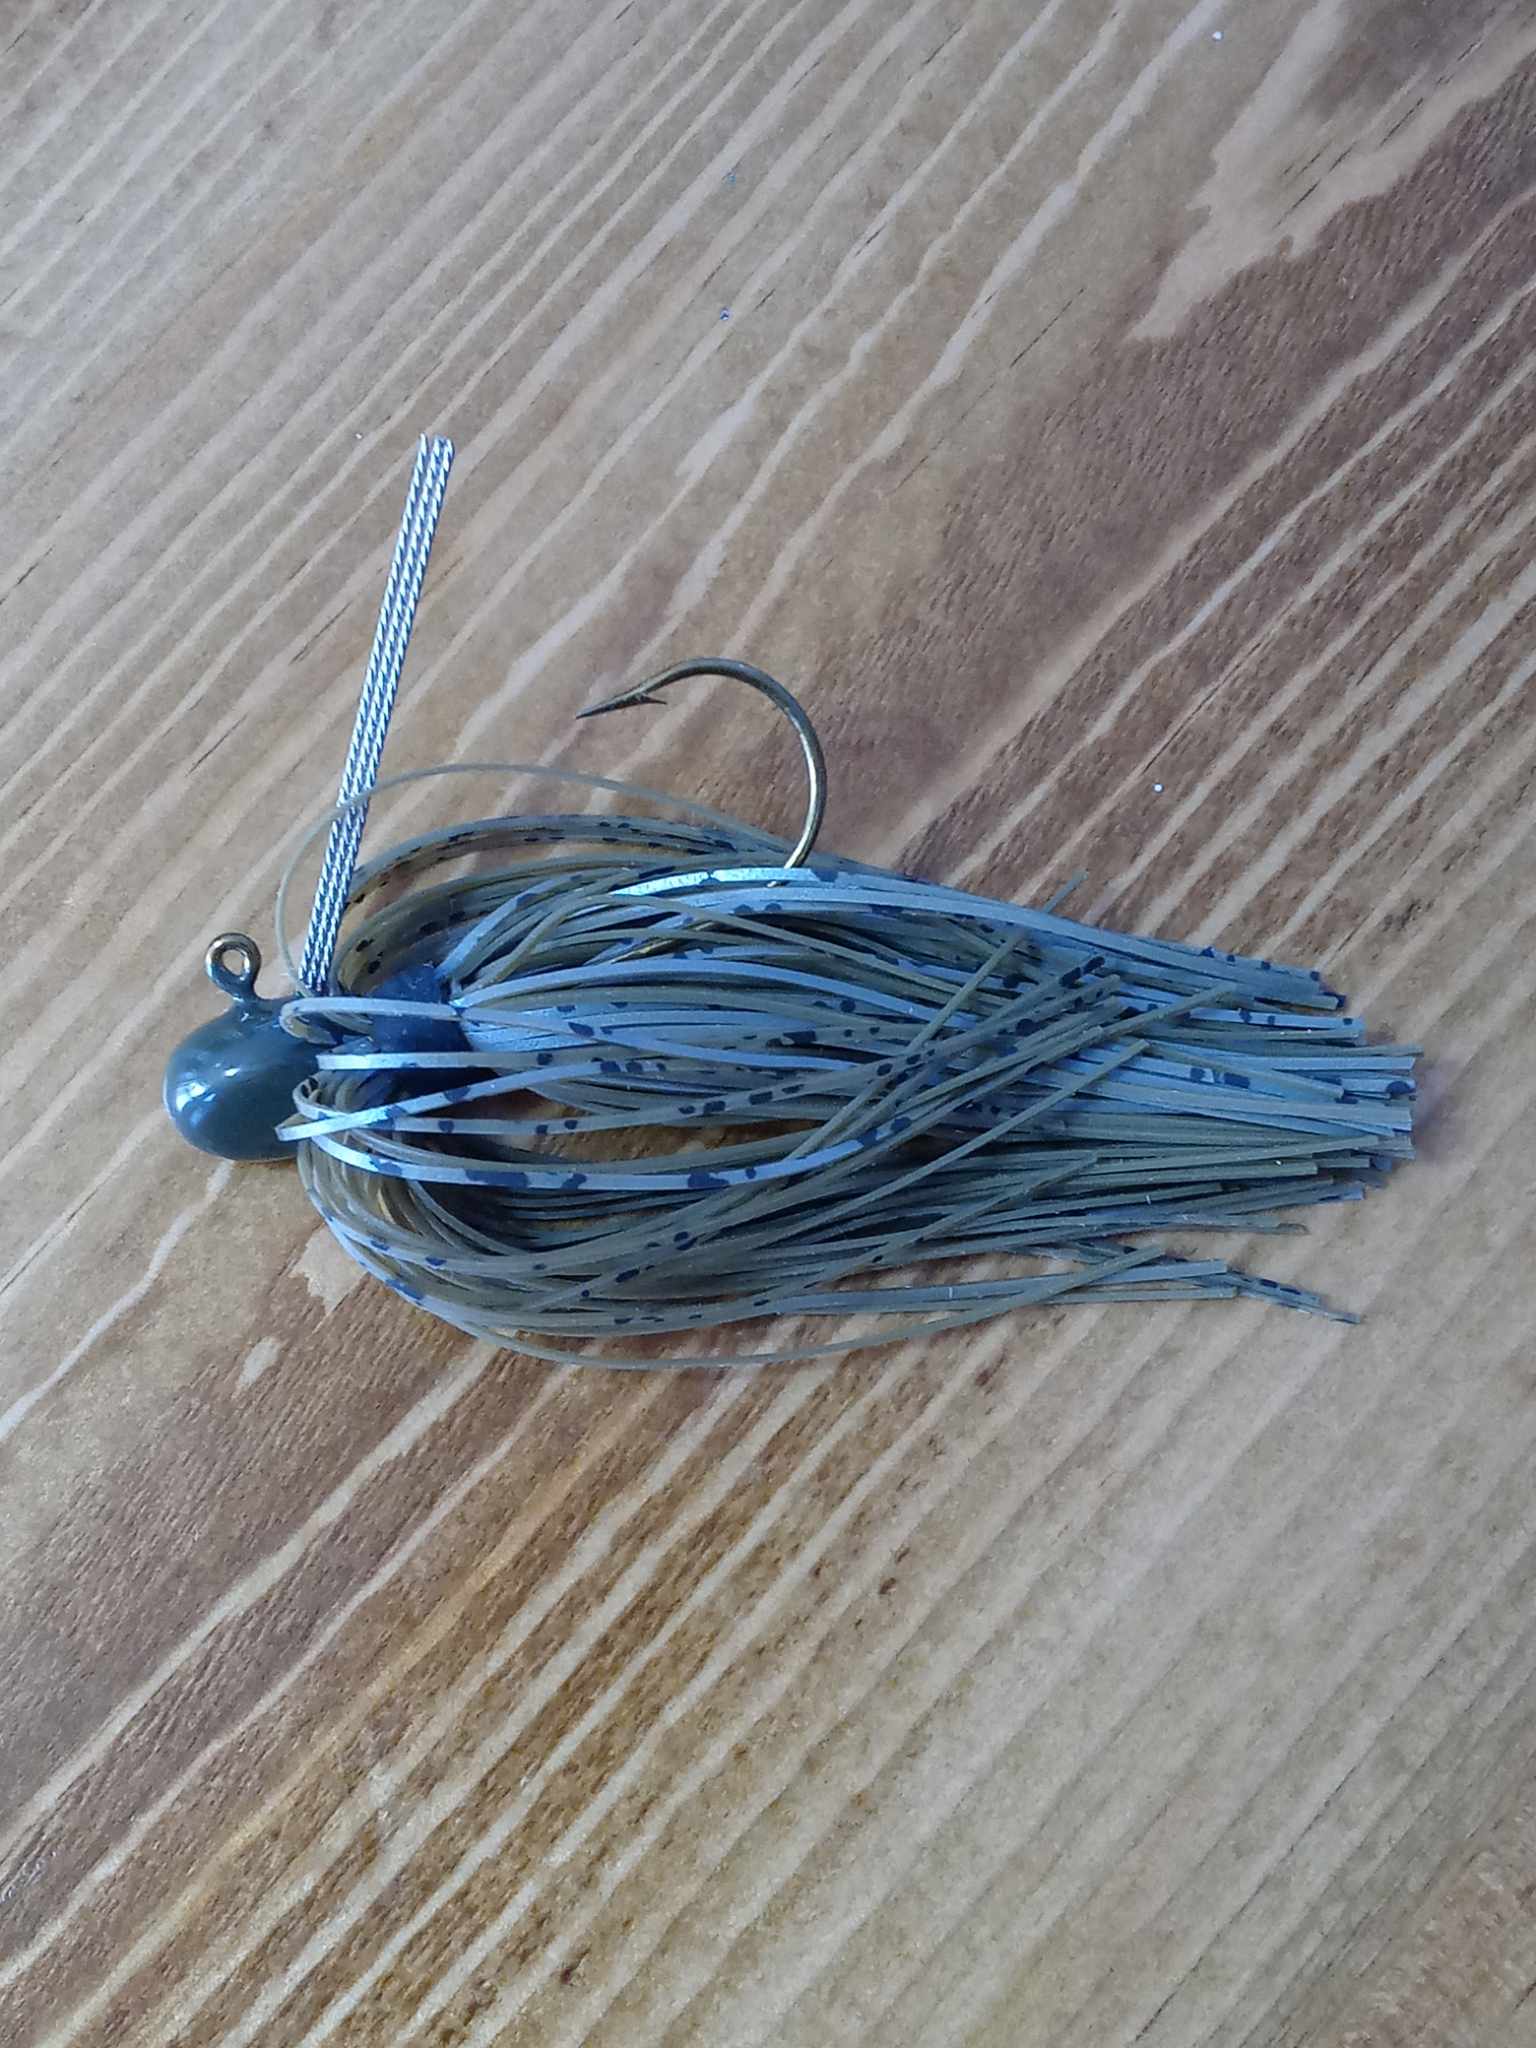 12 DHT Small Jaw Finesse Jig (Silicon Skirt) 12 DHT Small Jaw Finesse Jig (Silicon Skirt)